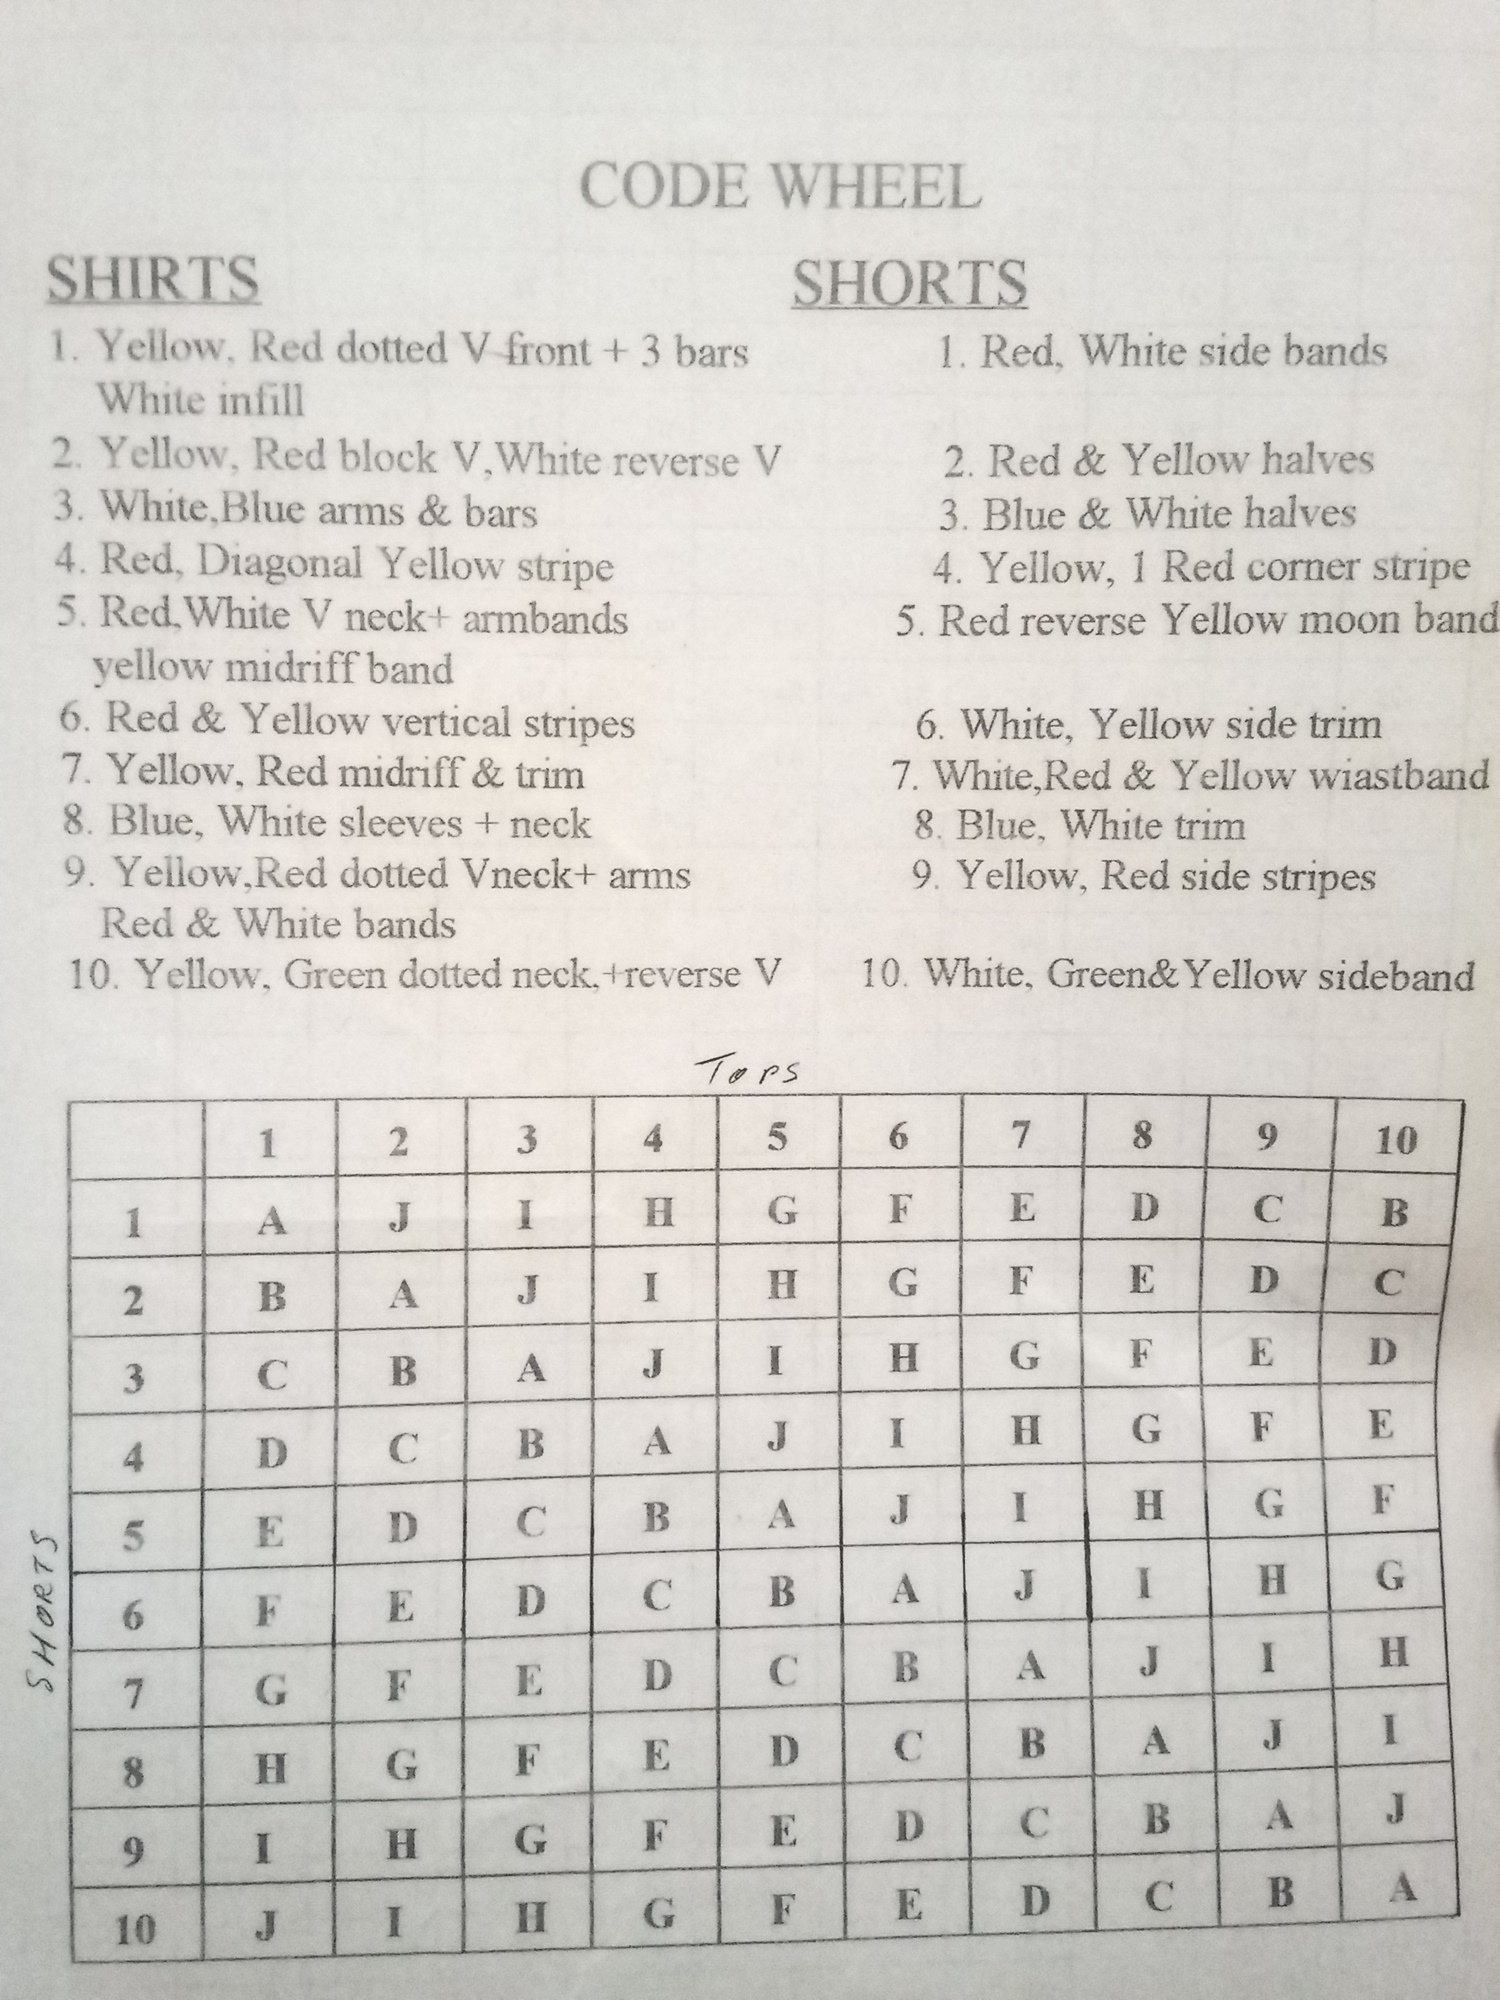 A laminated printout copy of the Premier Manager 2 codewheel. There are 10 different shirt patterns and 10 different shorts, written out here as descriptions rather than drawn in pictures. You can then take the numbers and use them to read the table below to get the letter(s) you need to pass the copy protection check.